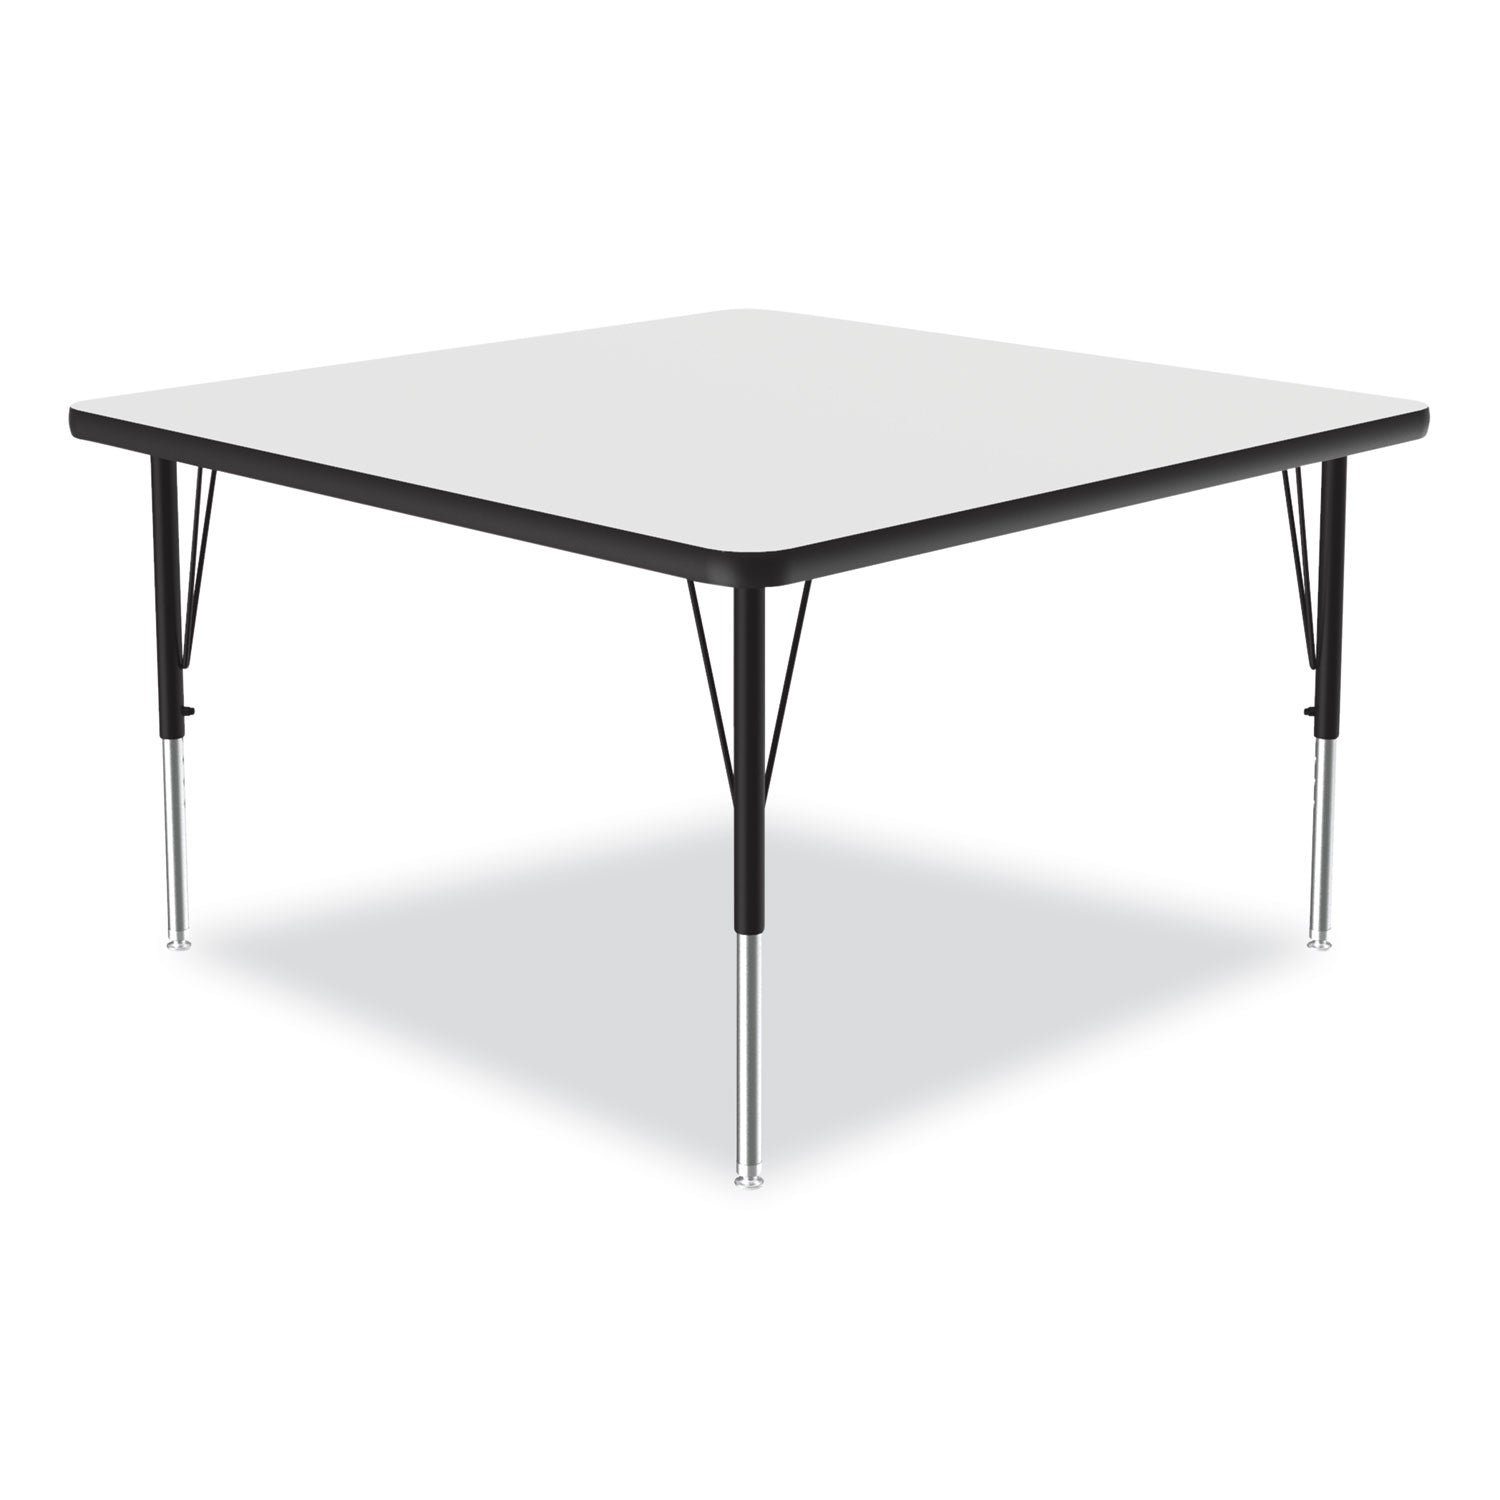 markerboard-activity-tables-square-48-x-48-x-19-to-29-white-top-black-legs-4-pallet-ships-in-4-6-business-days_crl4848de80954p - 2